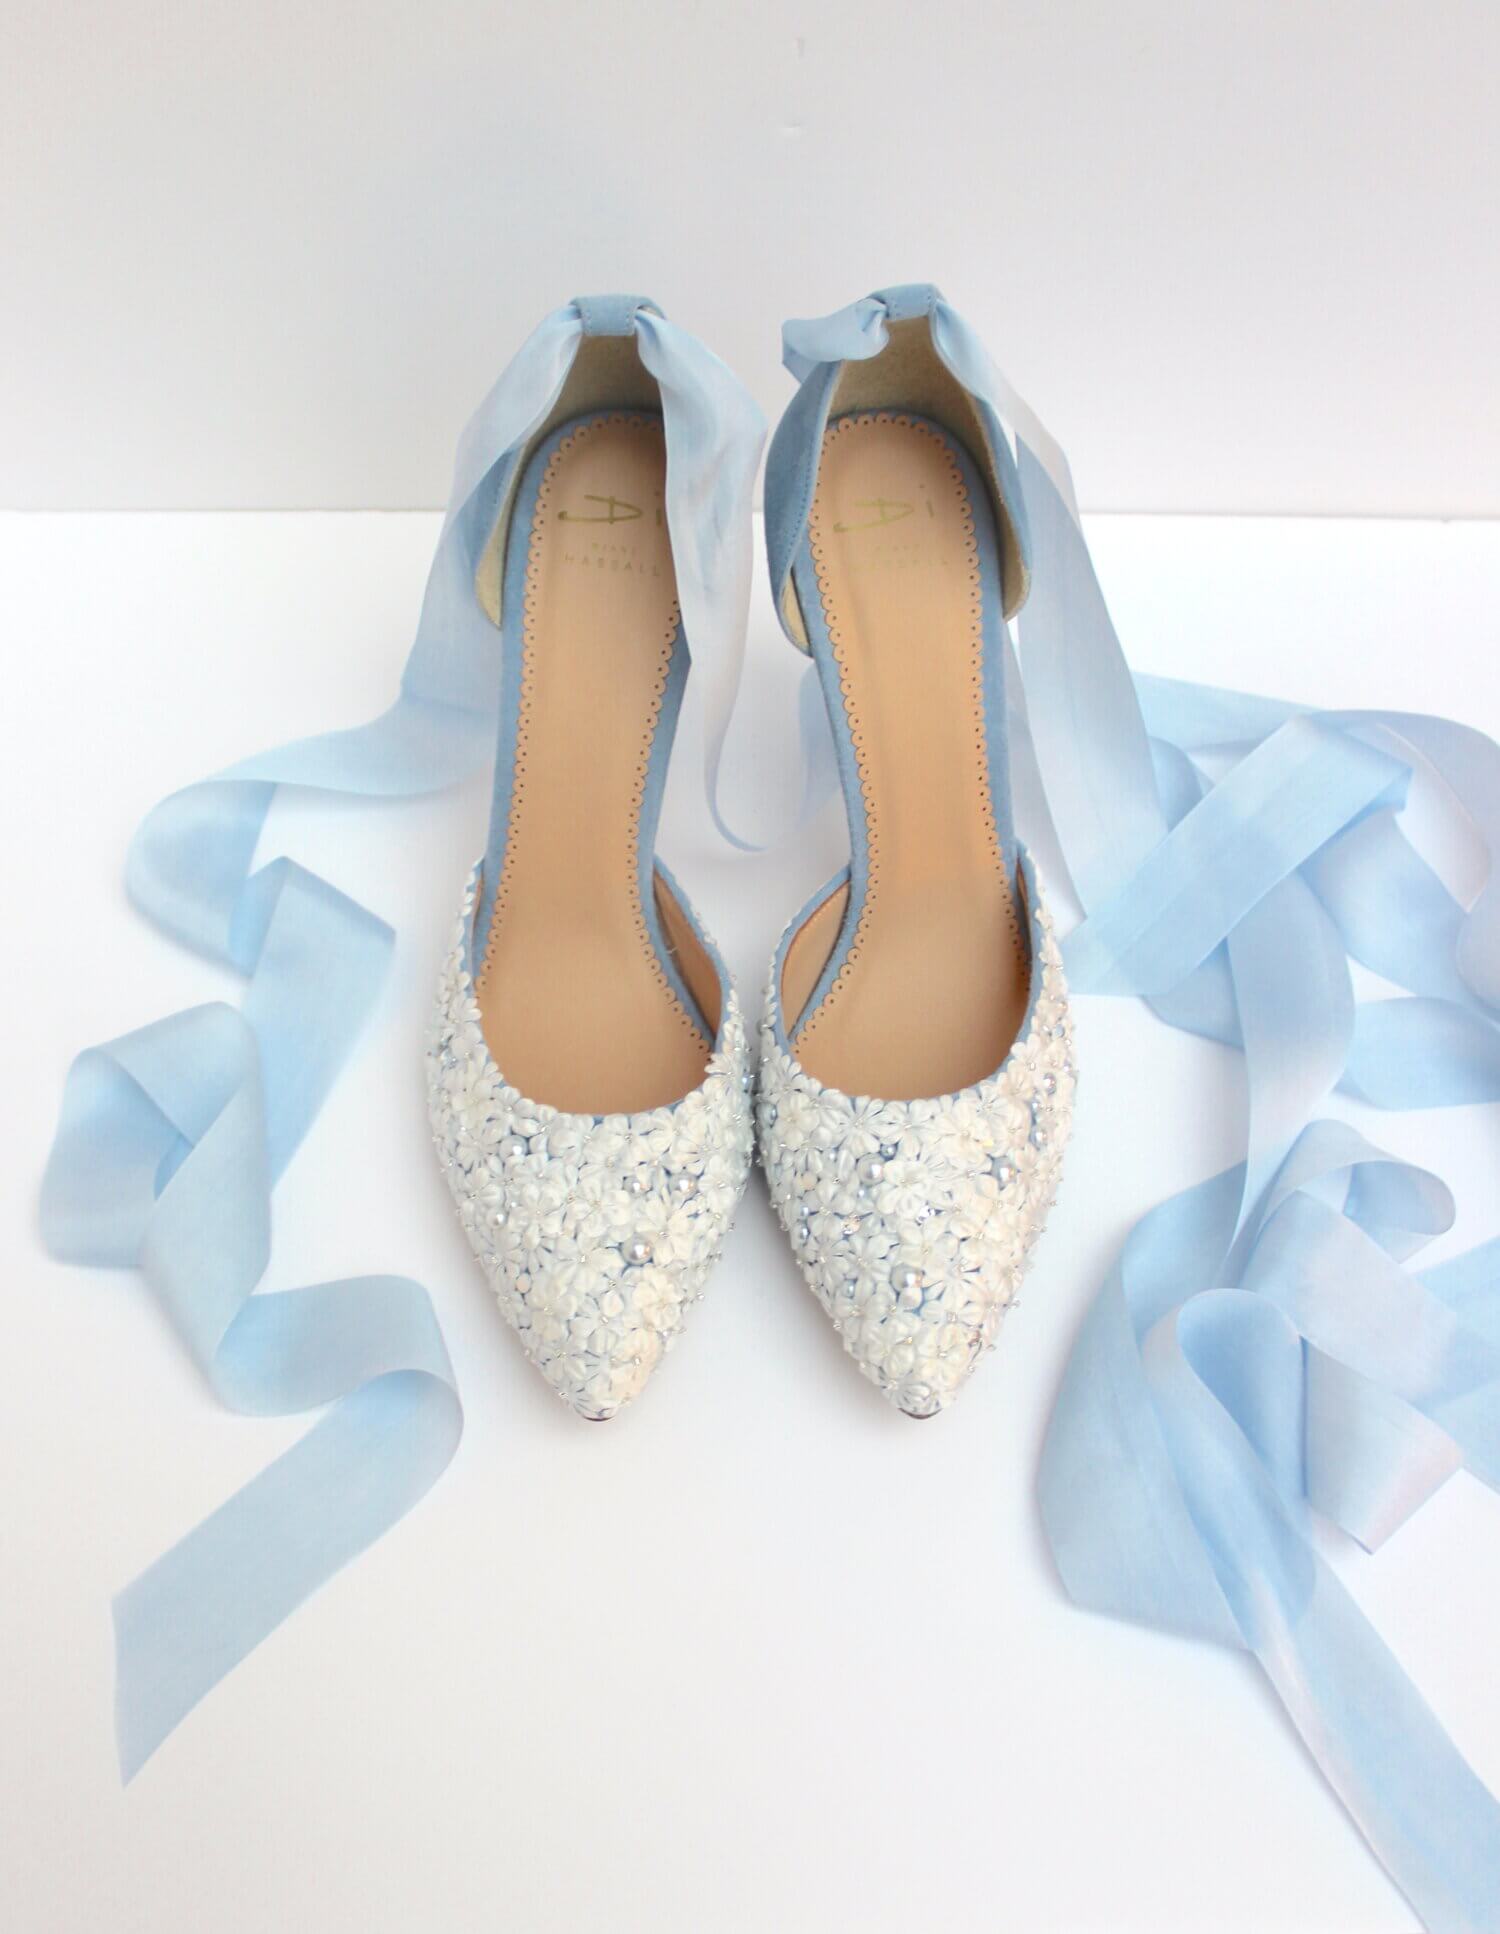 Miirella wedding shoes in blue suede with ivory floral detail and blue silk ribbon ties